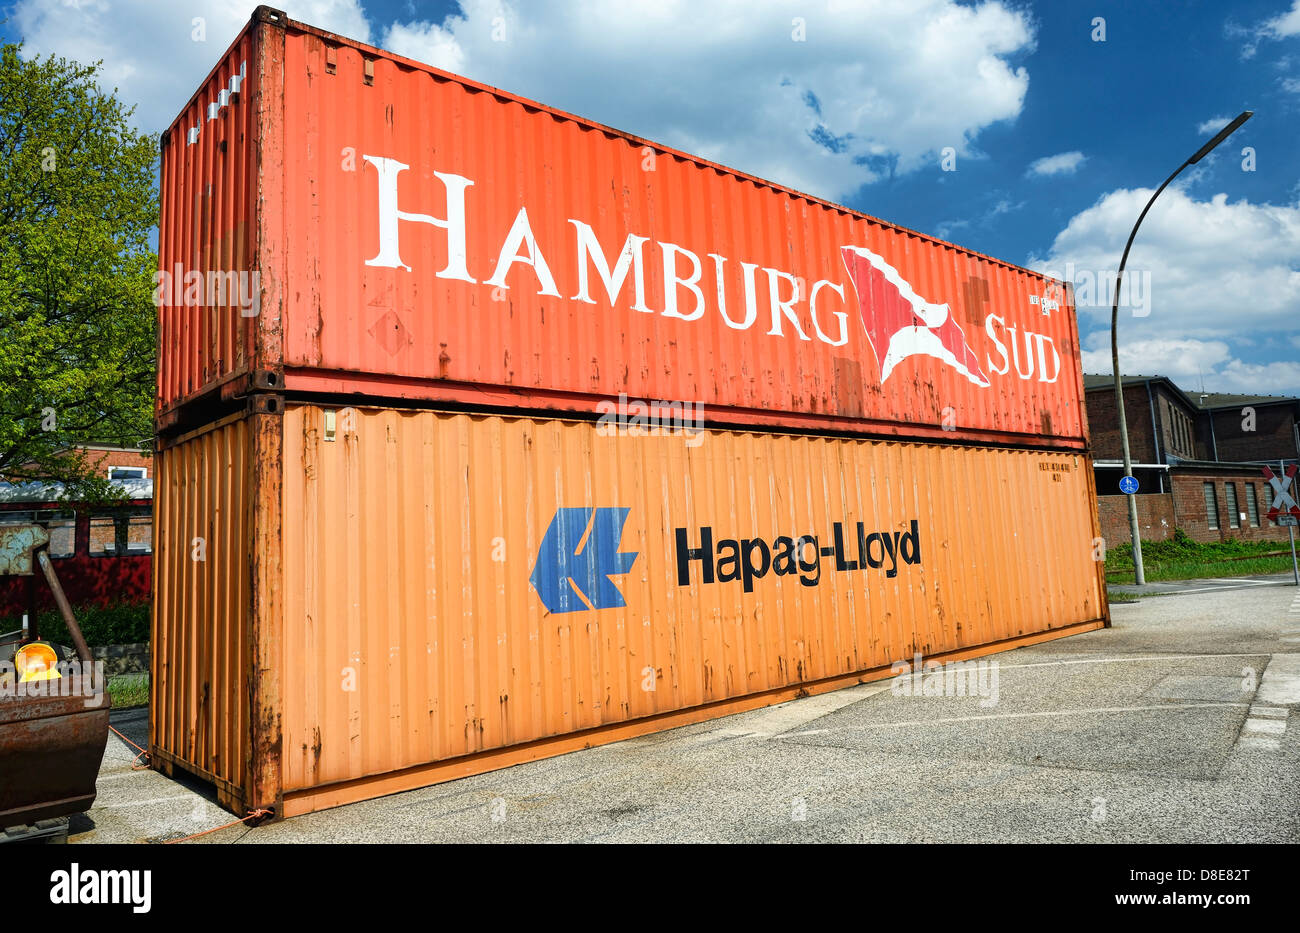 The container shipping companies Hapag-Lloyd and Hamburg Sued in Hamburg, Germany, Europe Stock Photo